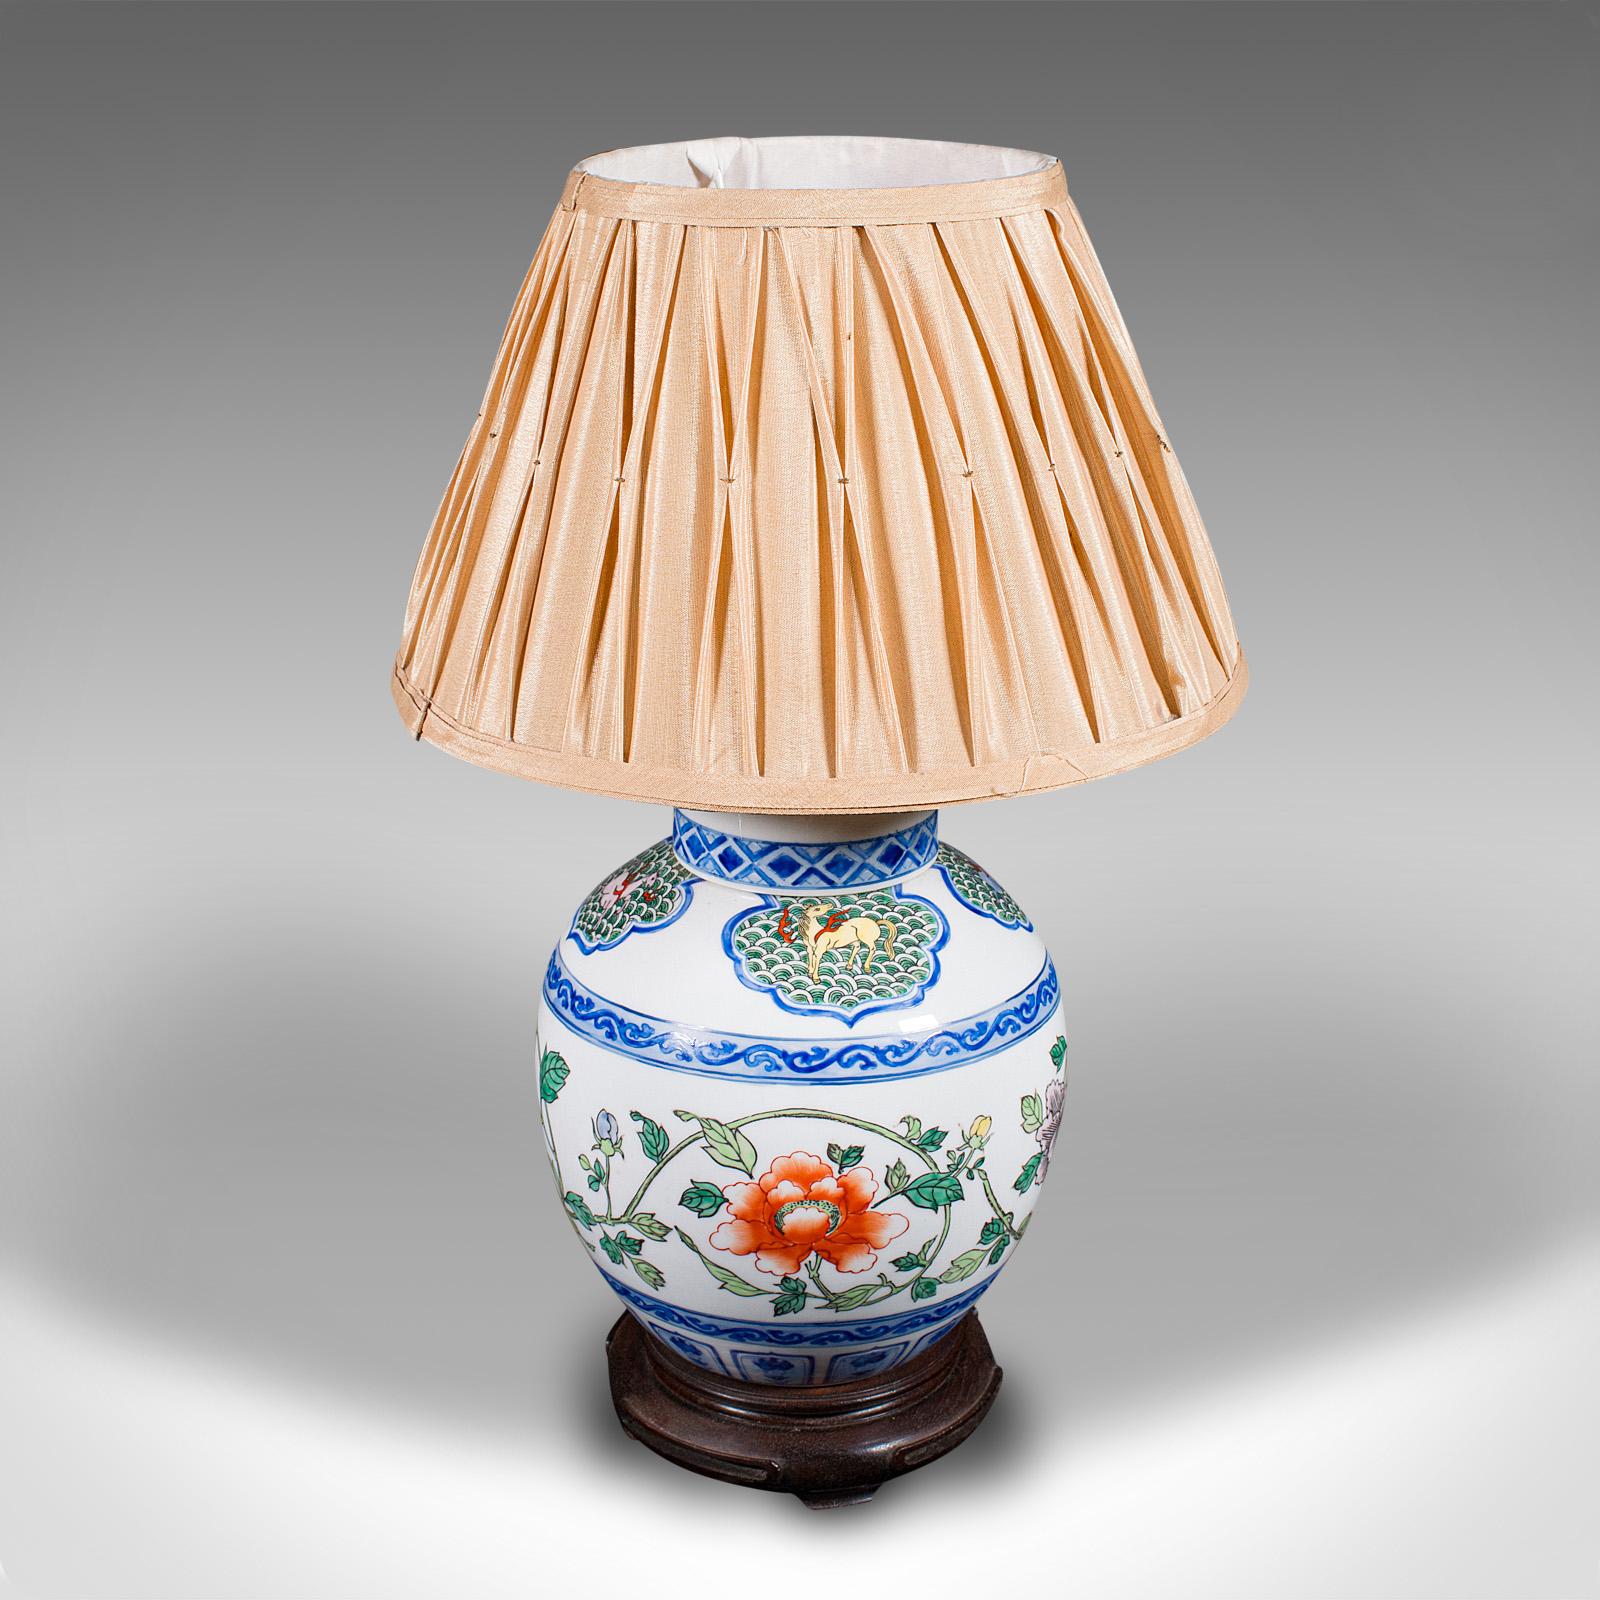 Vintage Art Deco Table Lamp, Chinese, Ceramic, Accent Light, Mid 20th Century For Sale 1